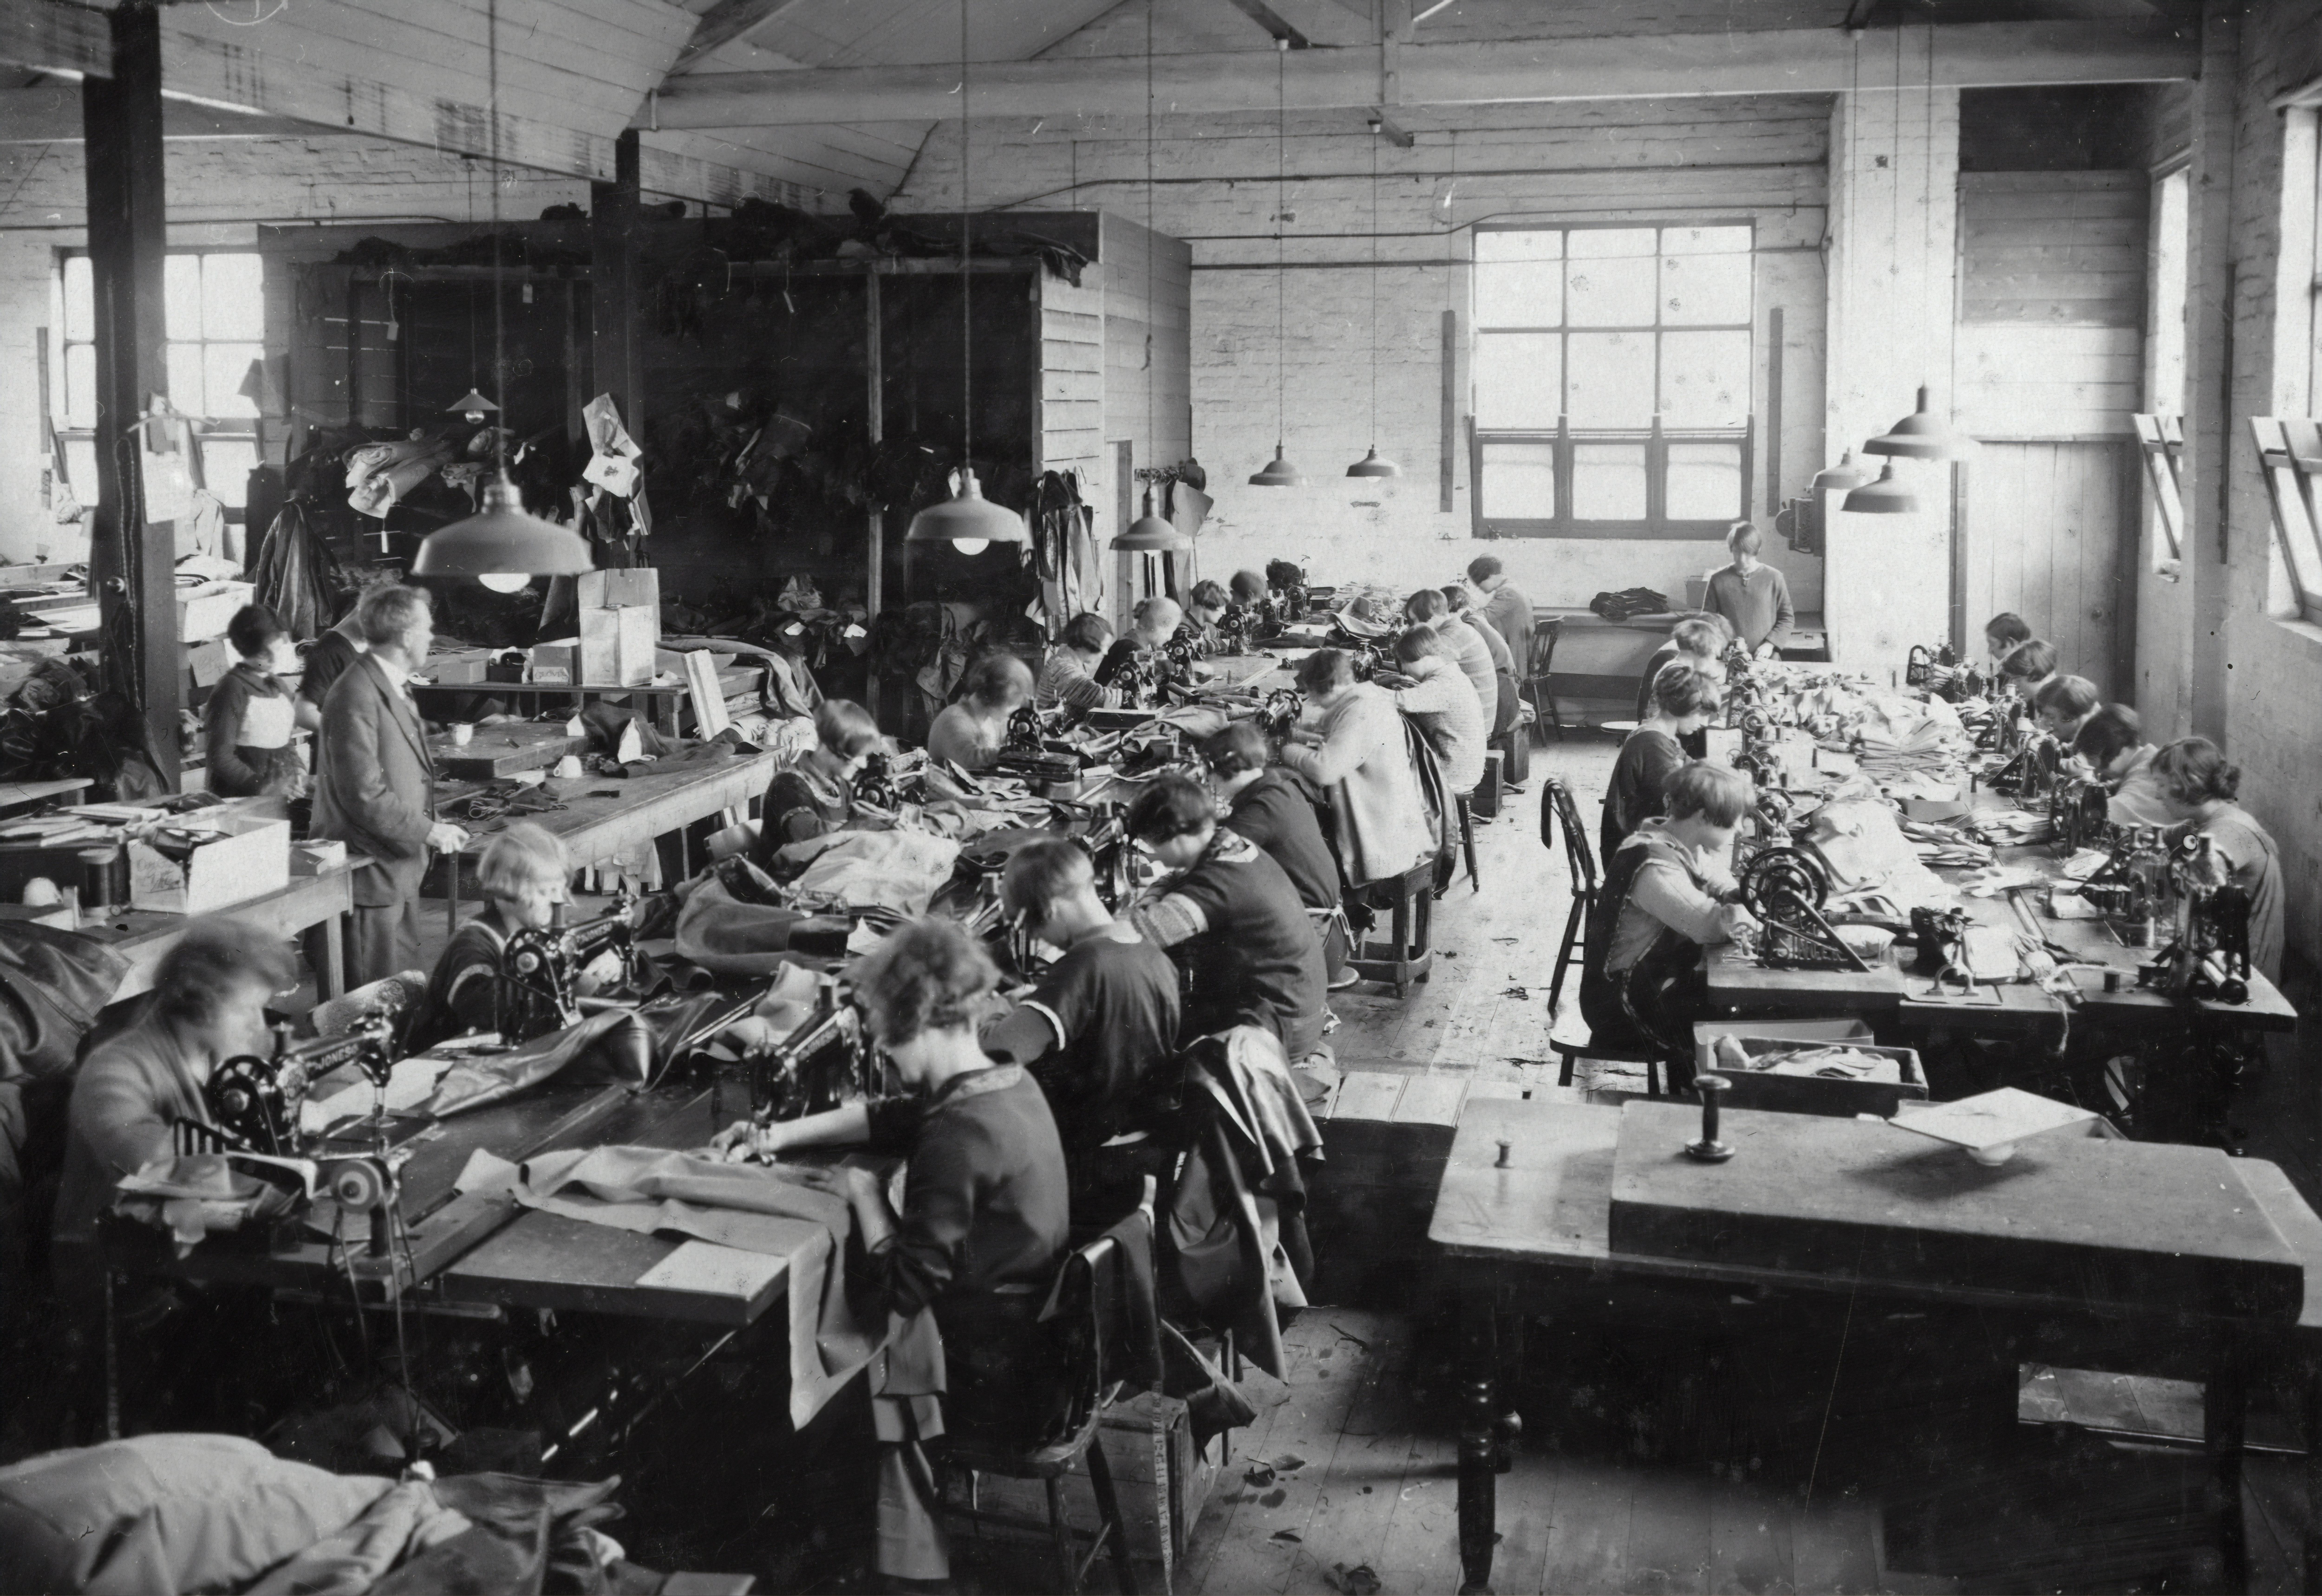 historical garment factory image from unsplash